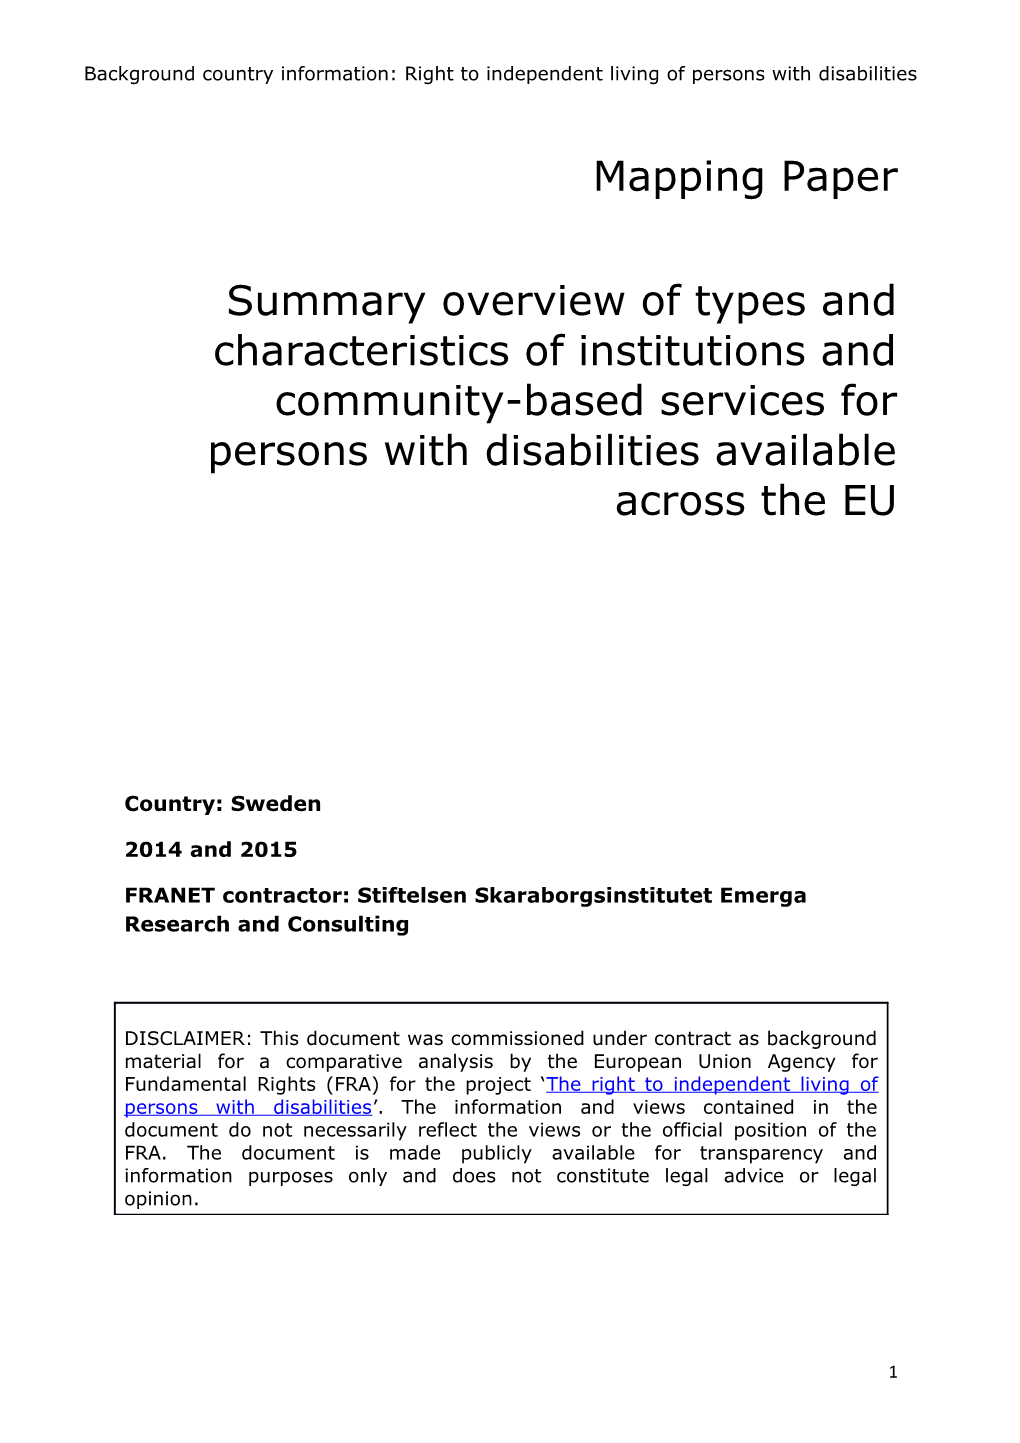 Summary Overview of Types and Characteristics of Institutions and Community-Based Services s2